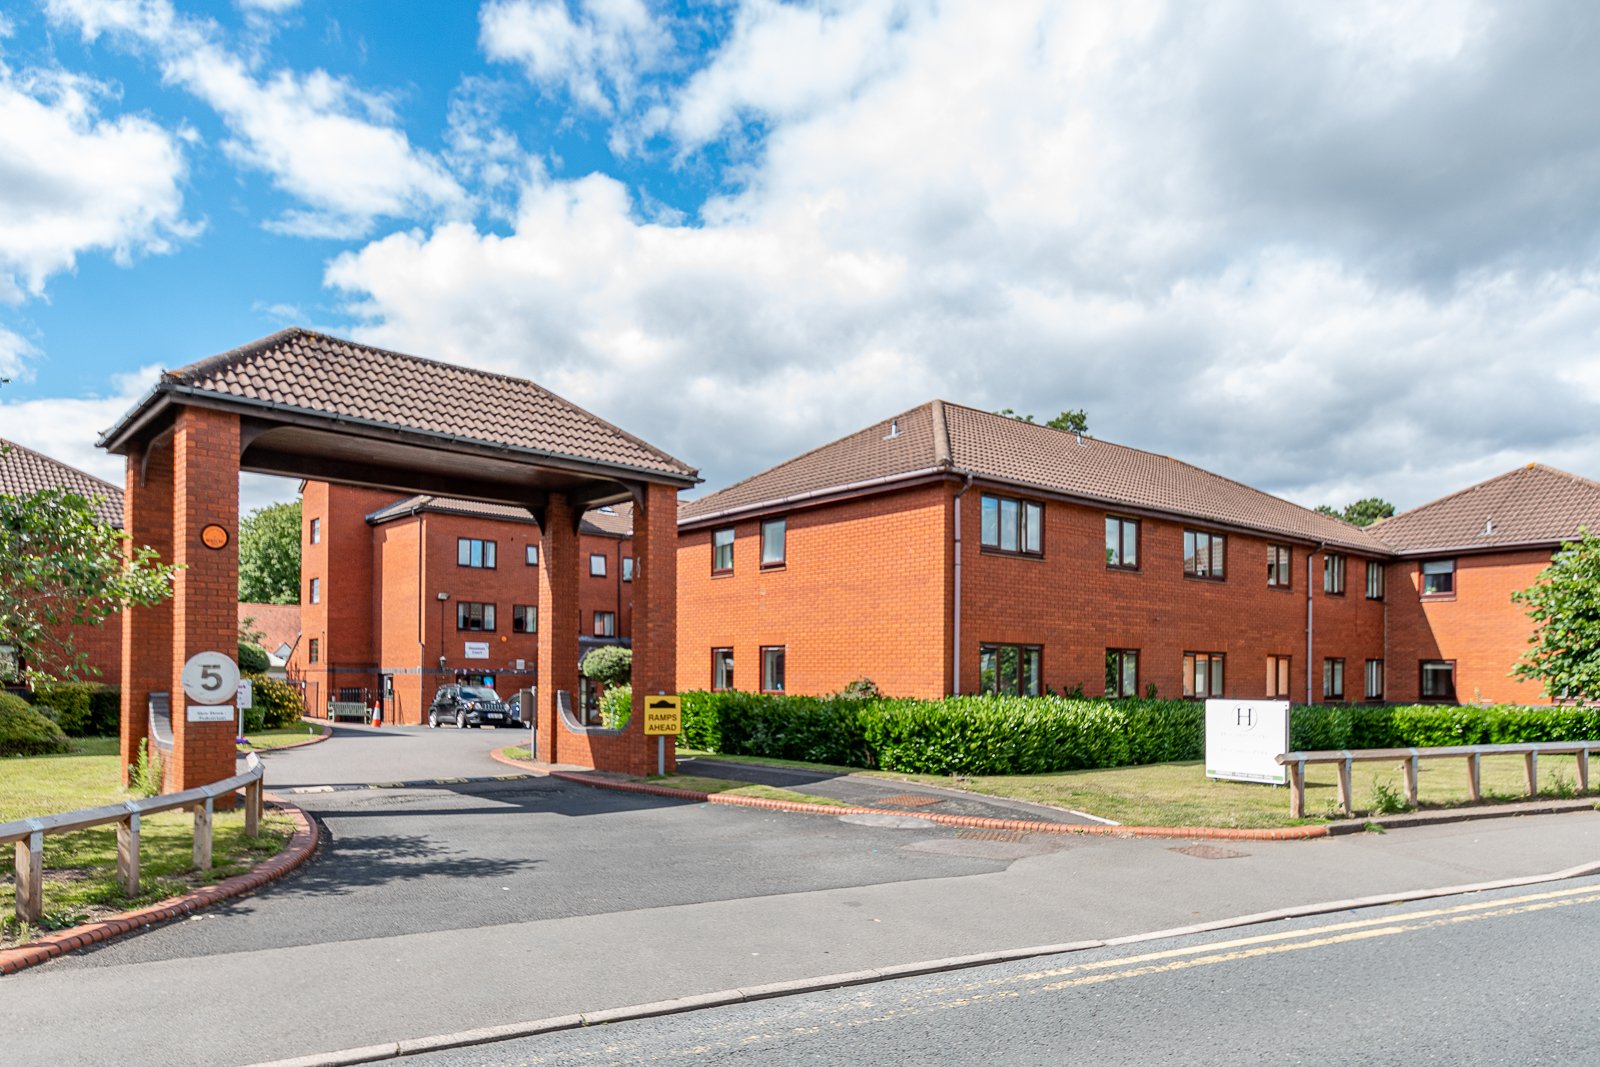 1 bed  for sale in Housman Park, Bromsgrove 12